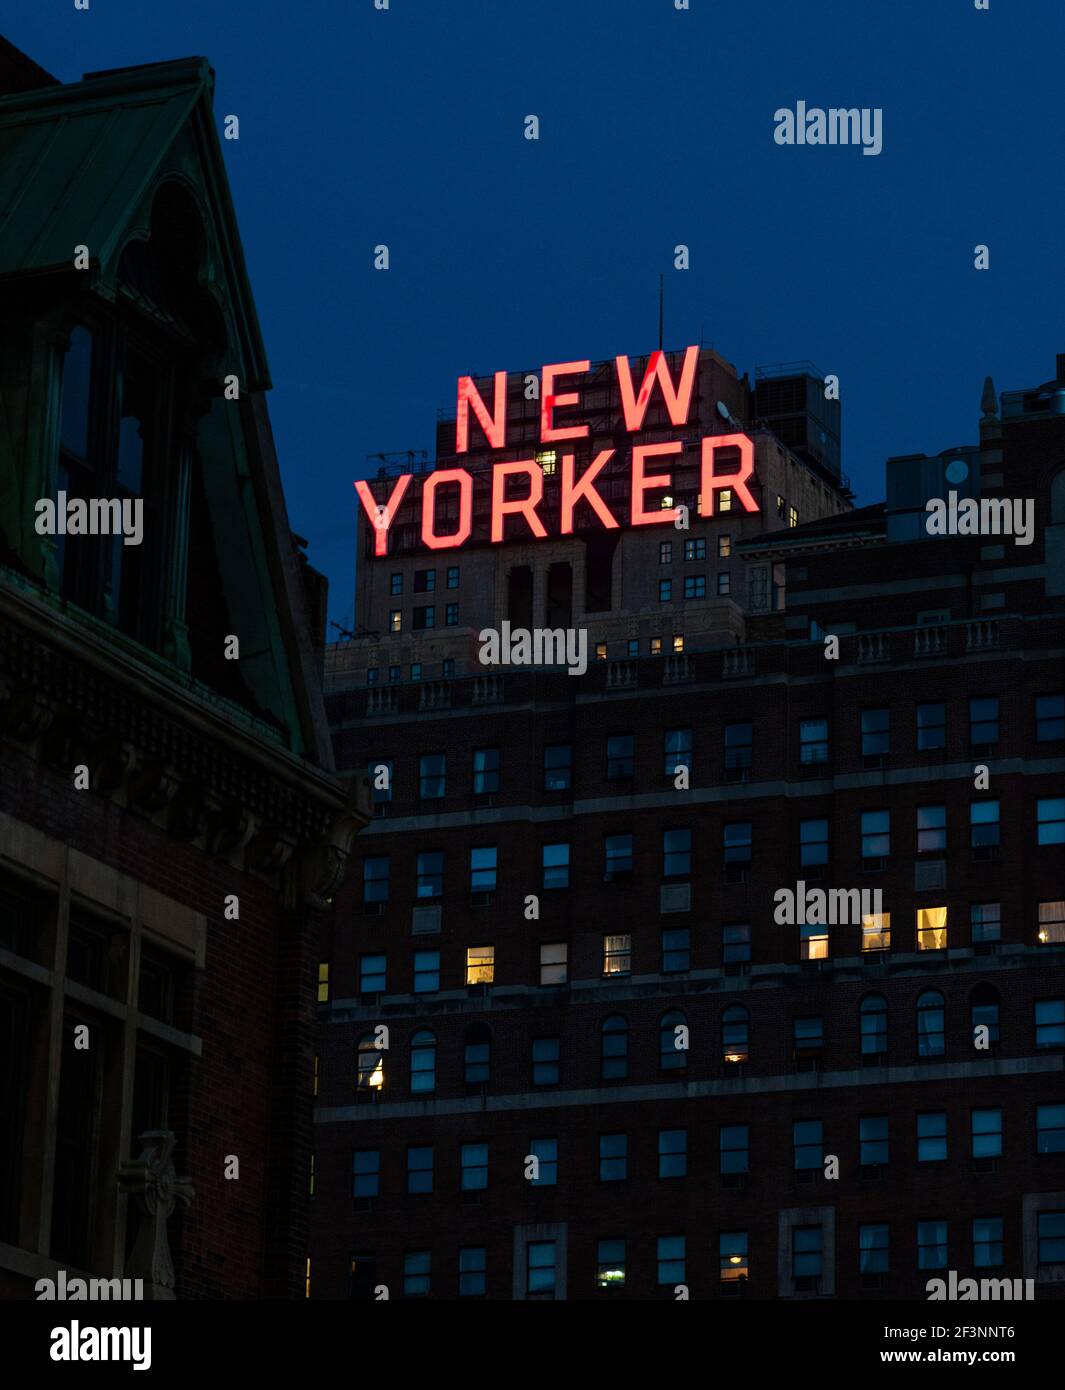 New Yorker Hotel neon sign at dusk. Stock Photo